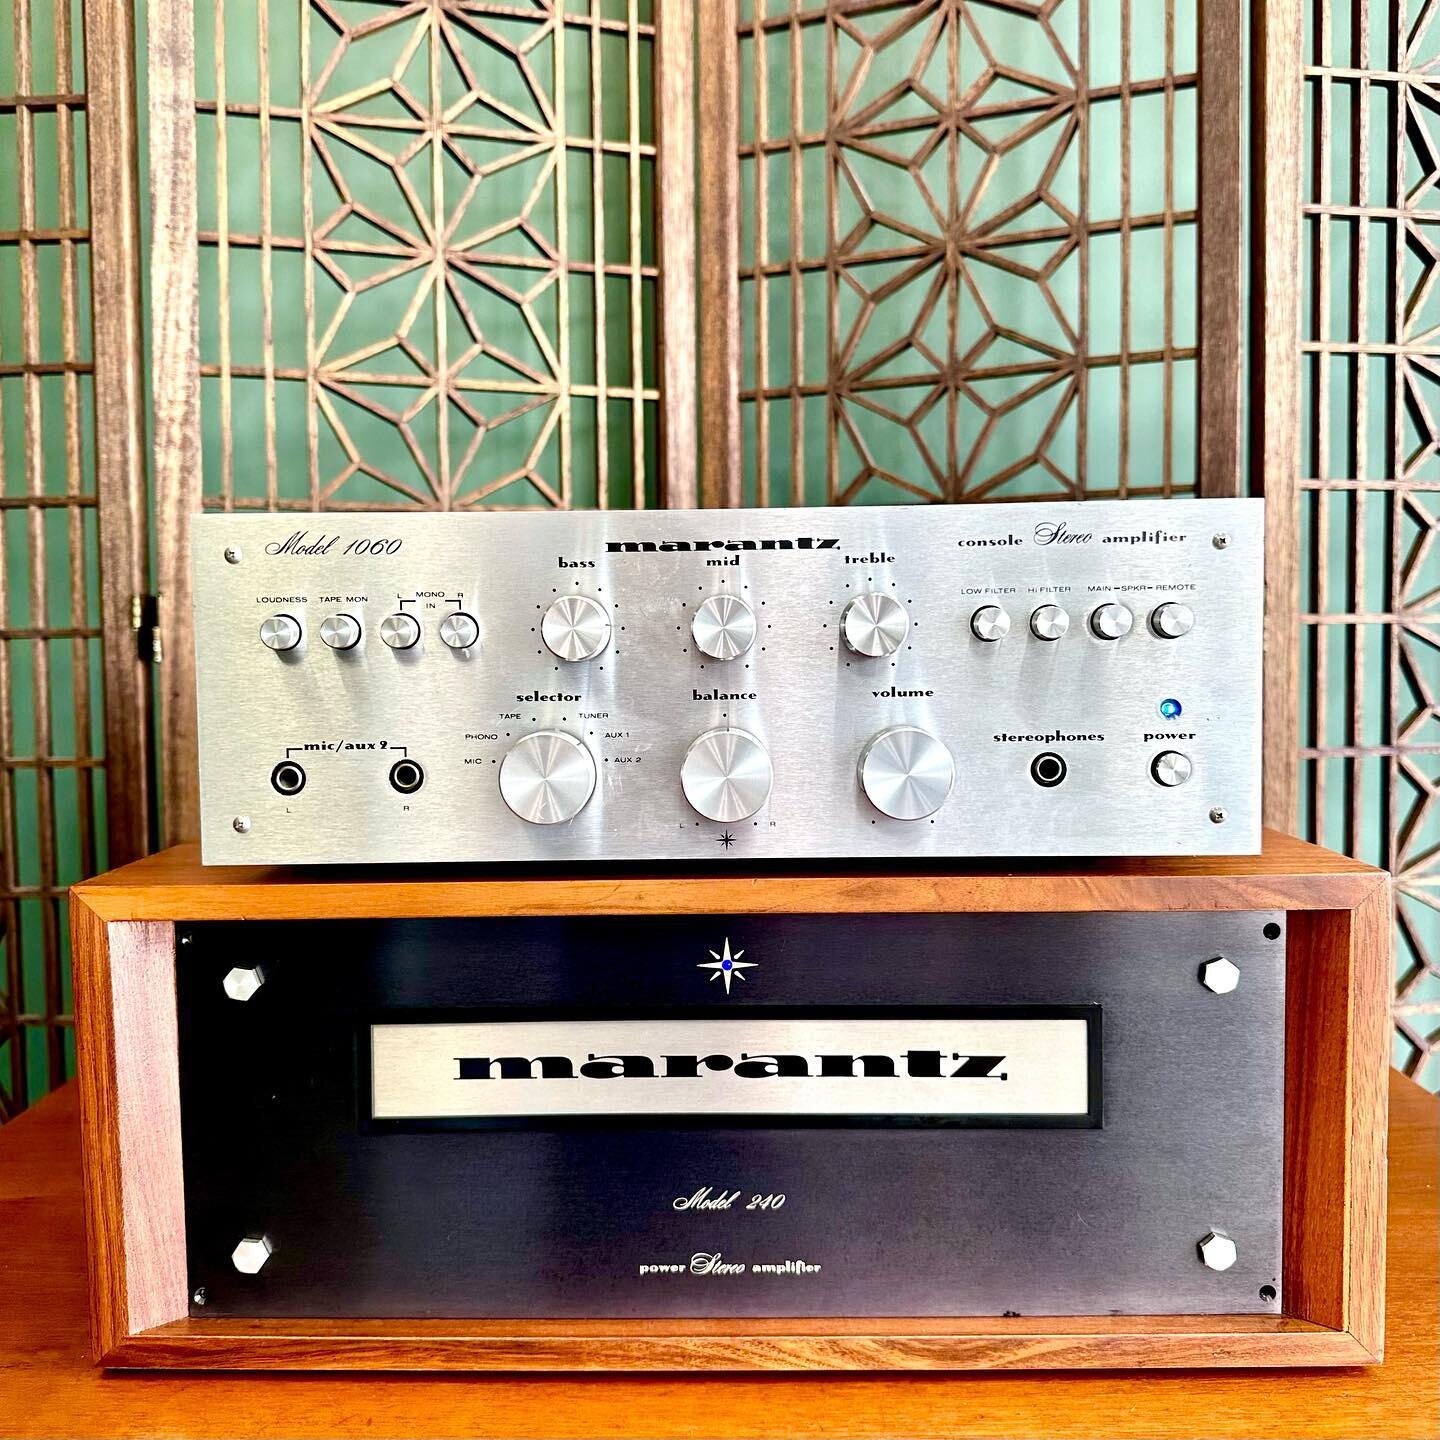 [AVAILABLE] For those of you looking for that classic Marantz sound, but with an extra boost of ⚡️POWER⚡️ todays post is for you.
Starting off with the Marantz 240 power amp, offering 120 watts per channel, this power amp will push even demanding spe